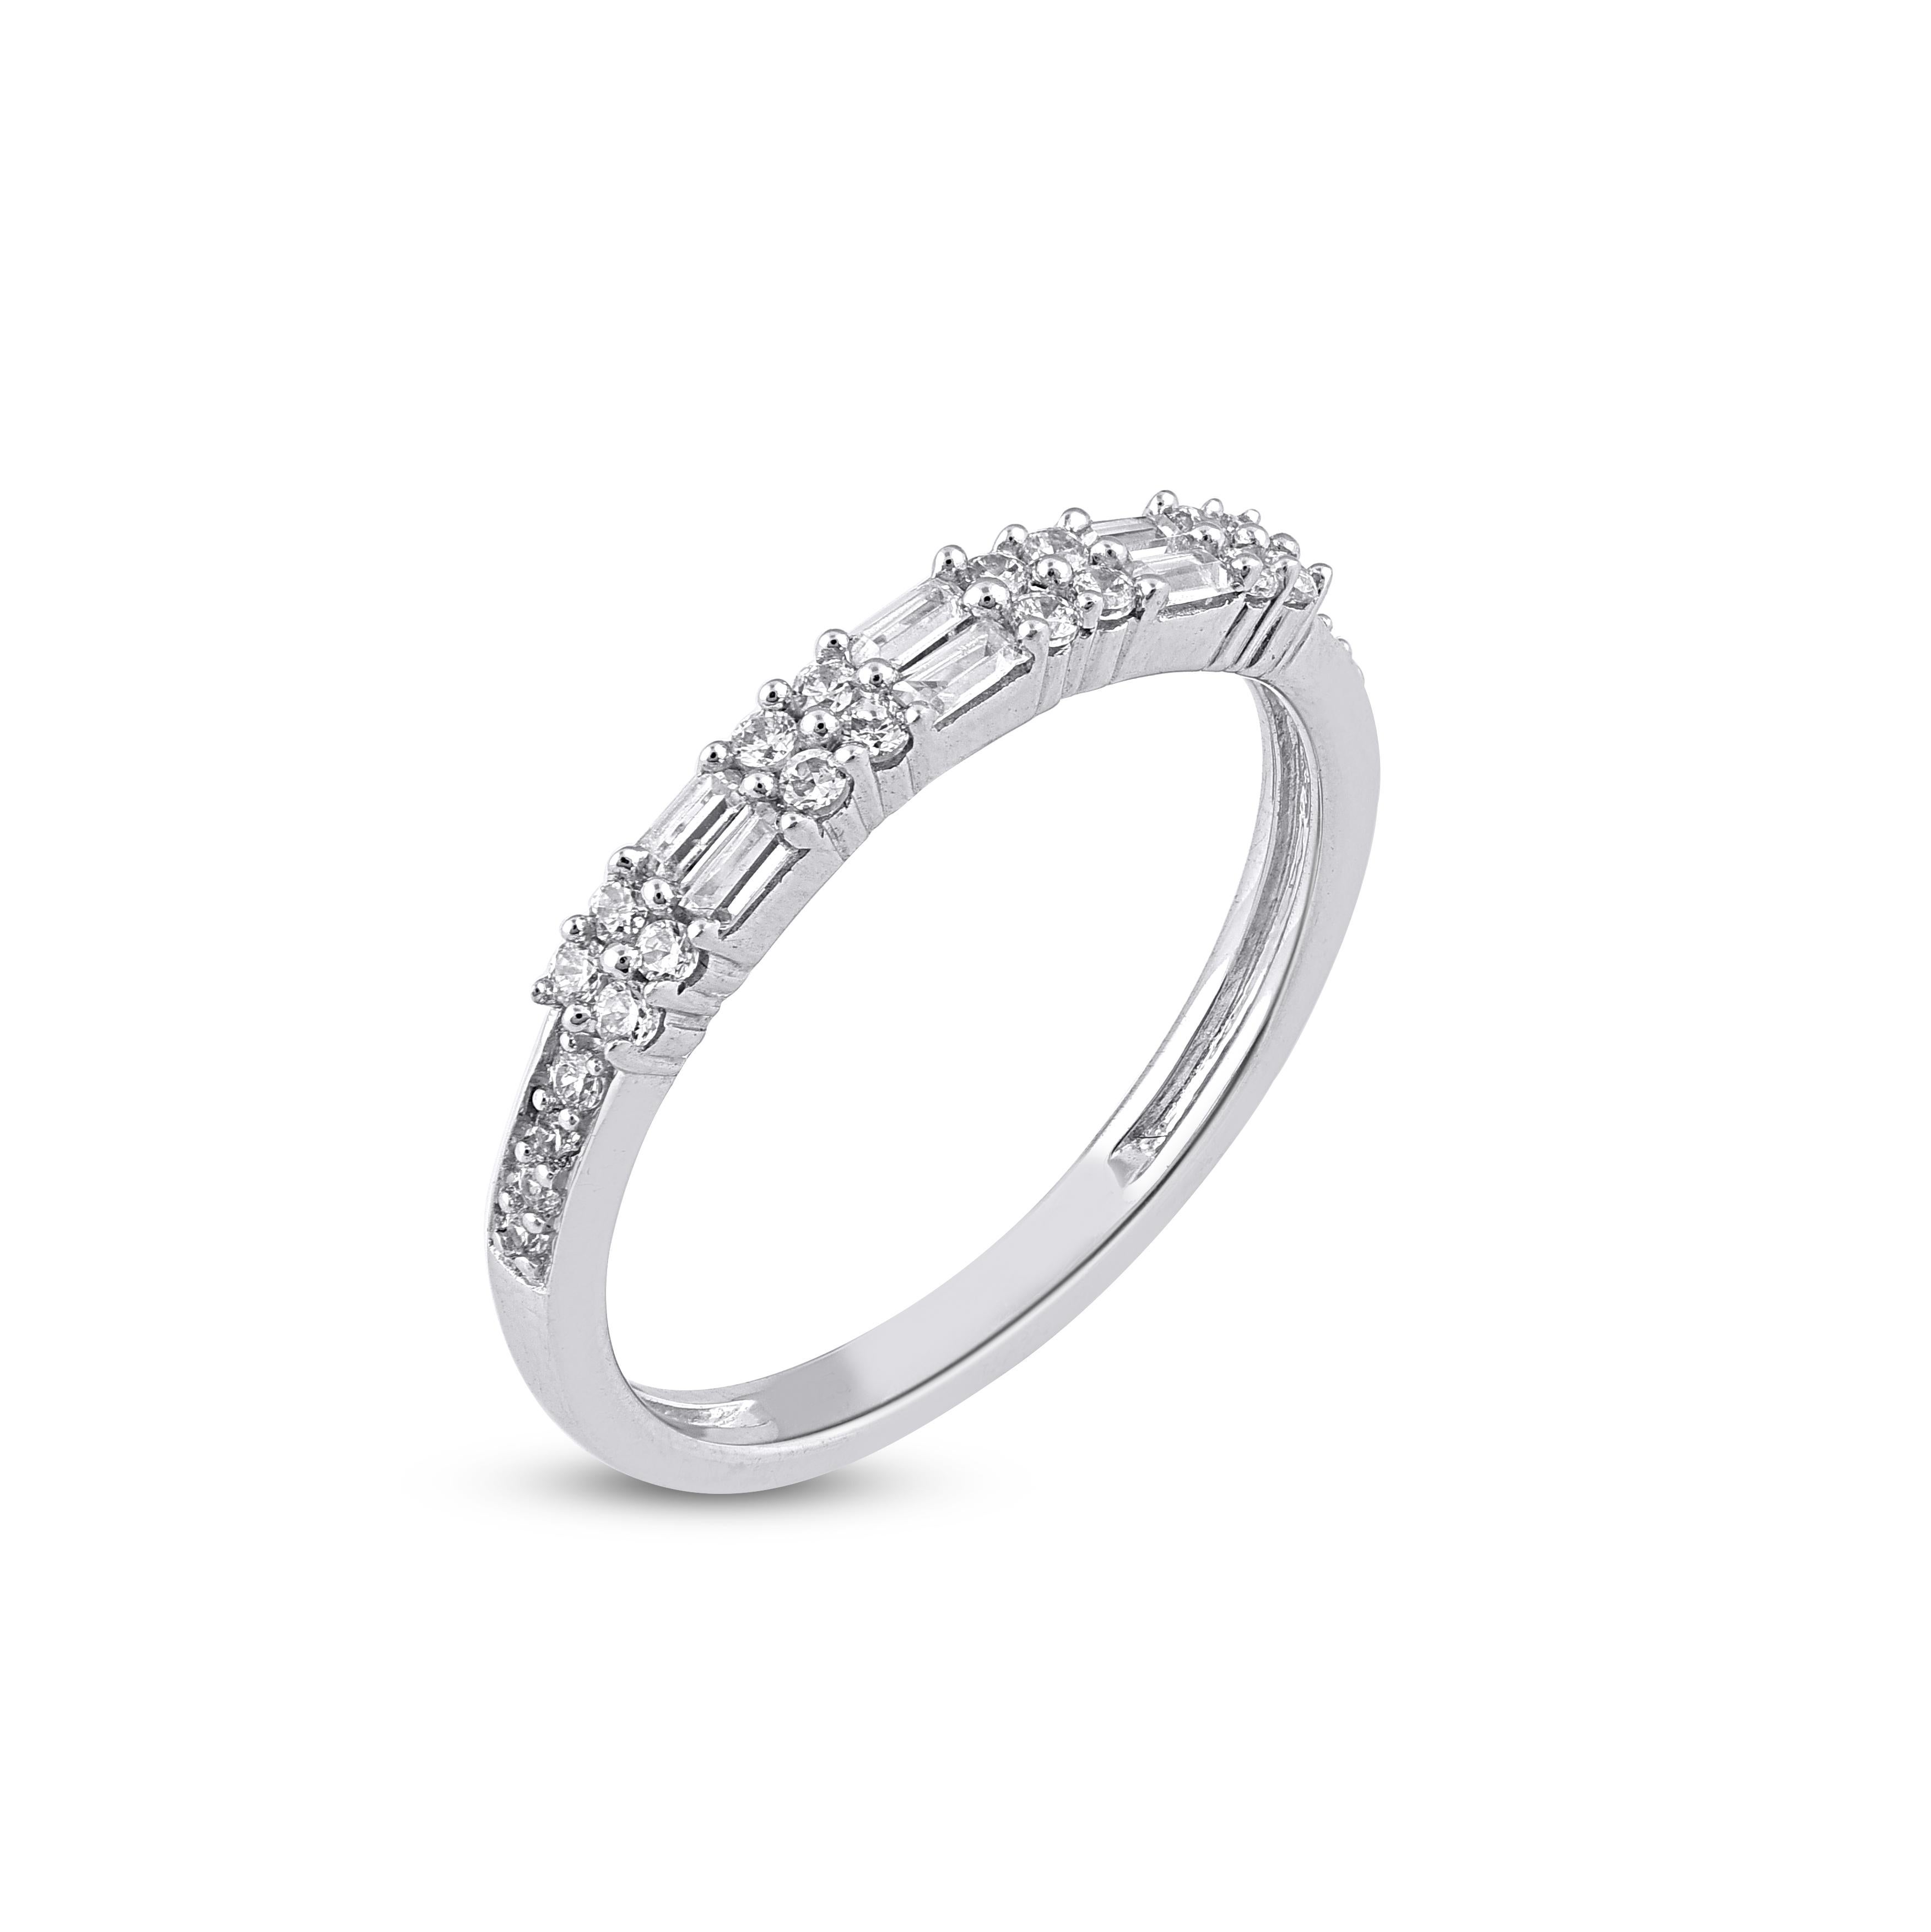 Simply stunning, this diamond wedding band sparkles with the excitement of the moment. The ring is crafted from 14-karat white gold and features Round Brilliant 24 and Baguette - 6 white diamonds, Prong & Pave set, H-I color I2 clarity and a high